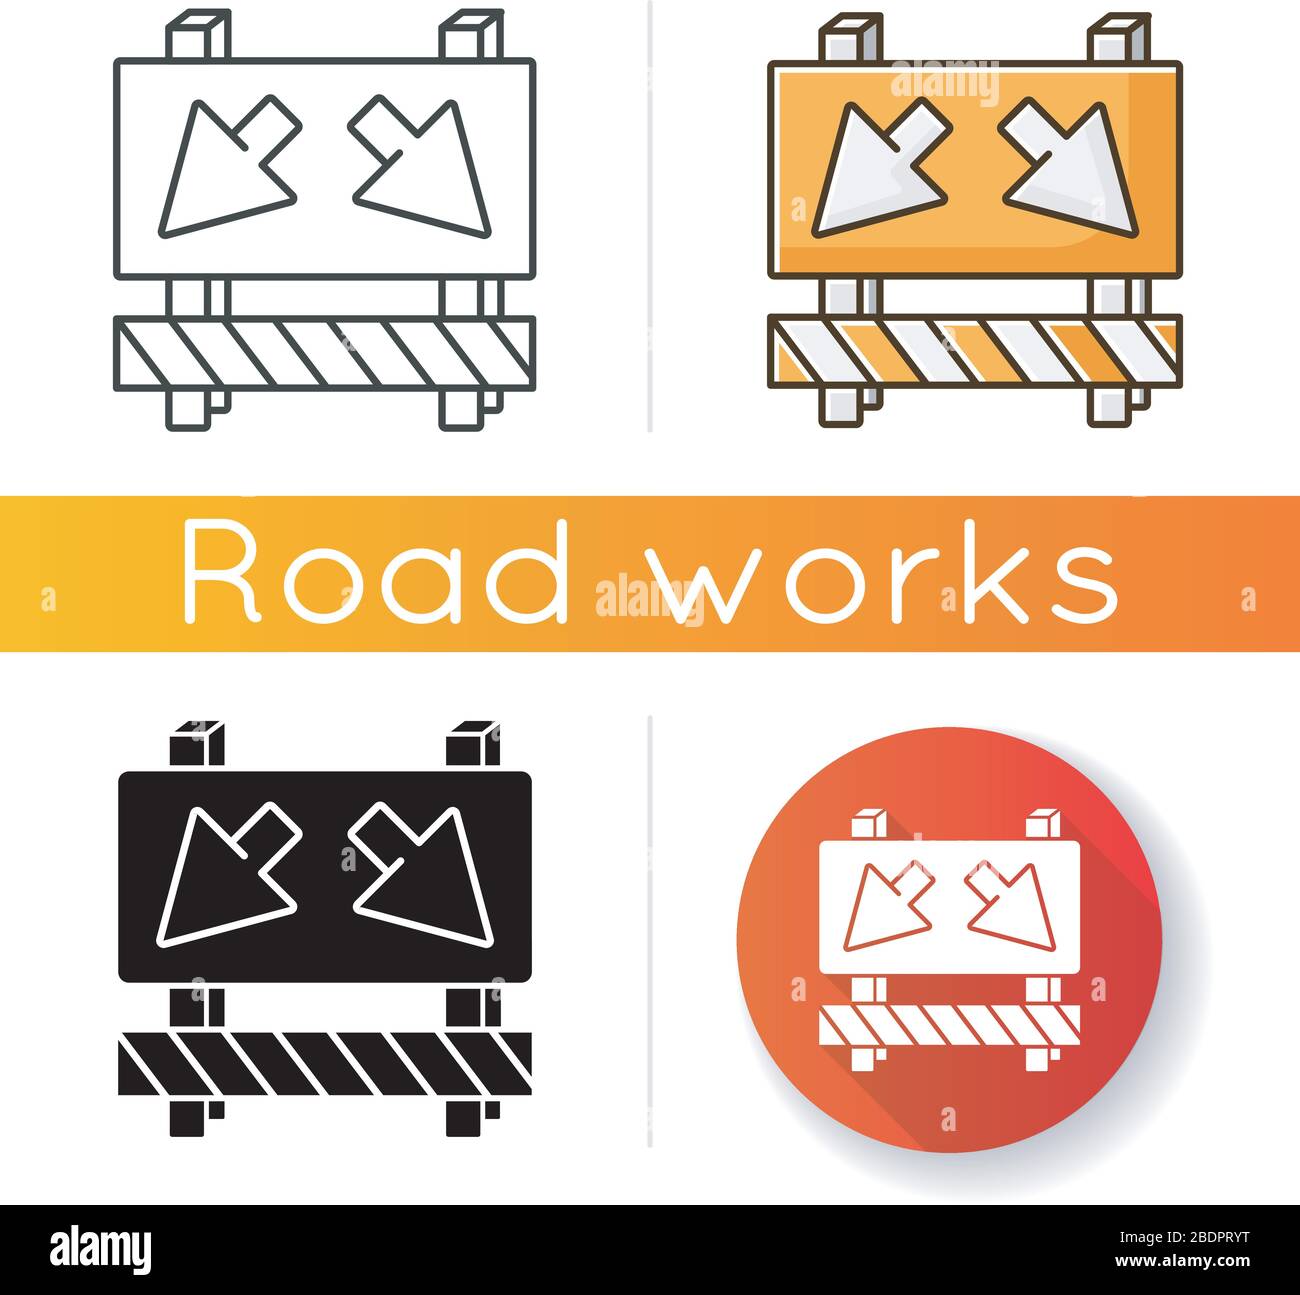 Detour icon. Road works ahead sign. Roadsign to change route. Roadblock on street with arrows. Take roundabout on highway. Linear black and RGB color Stock Vector